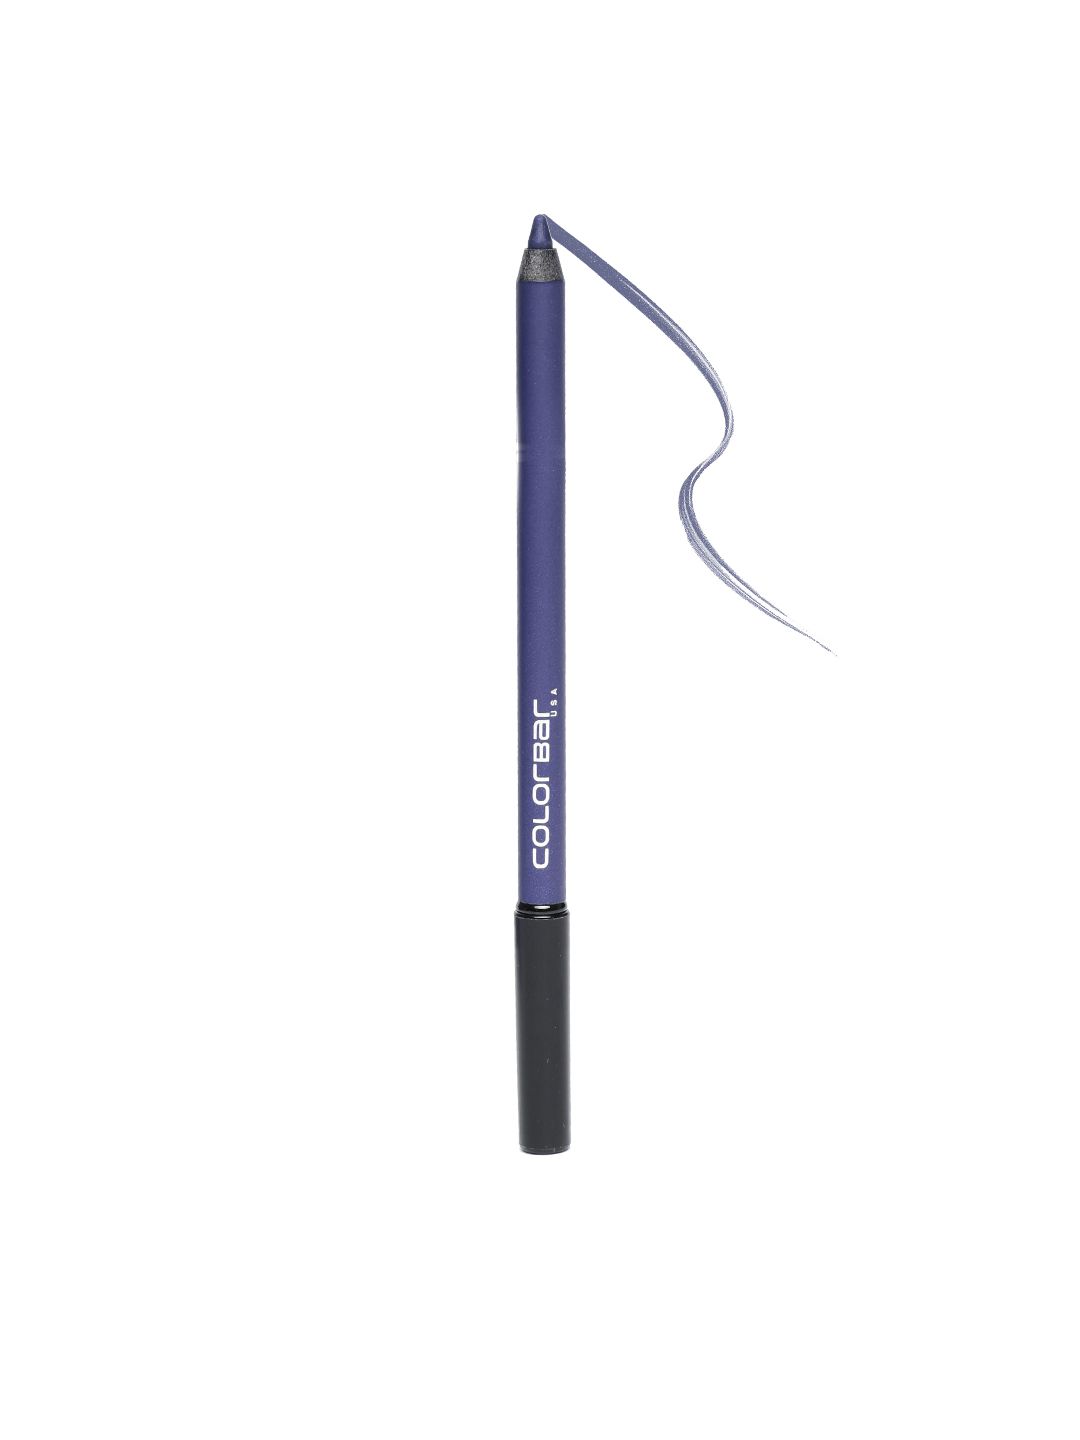 Colorbar Just Smoky Eye Pencil - Electra Blue 007 1.2g Price in India